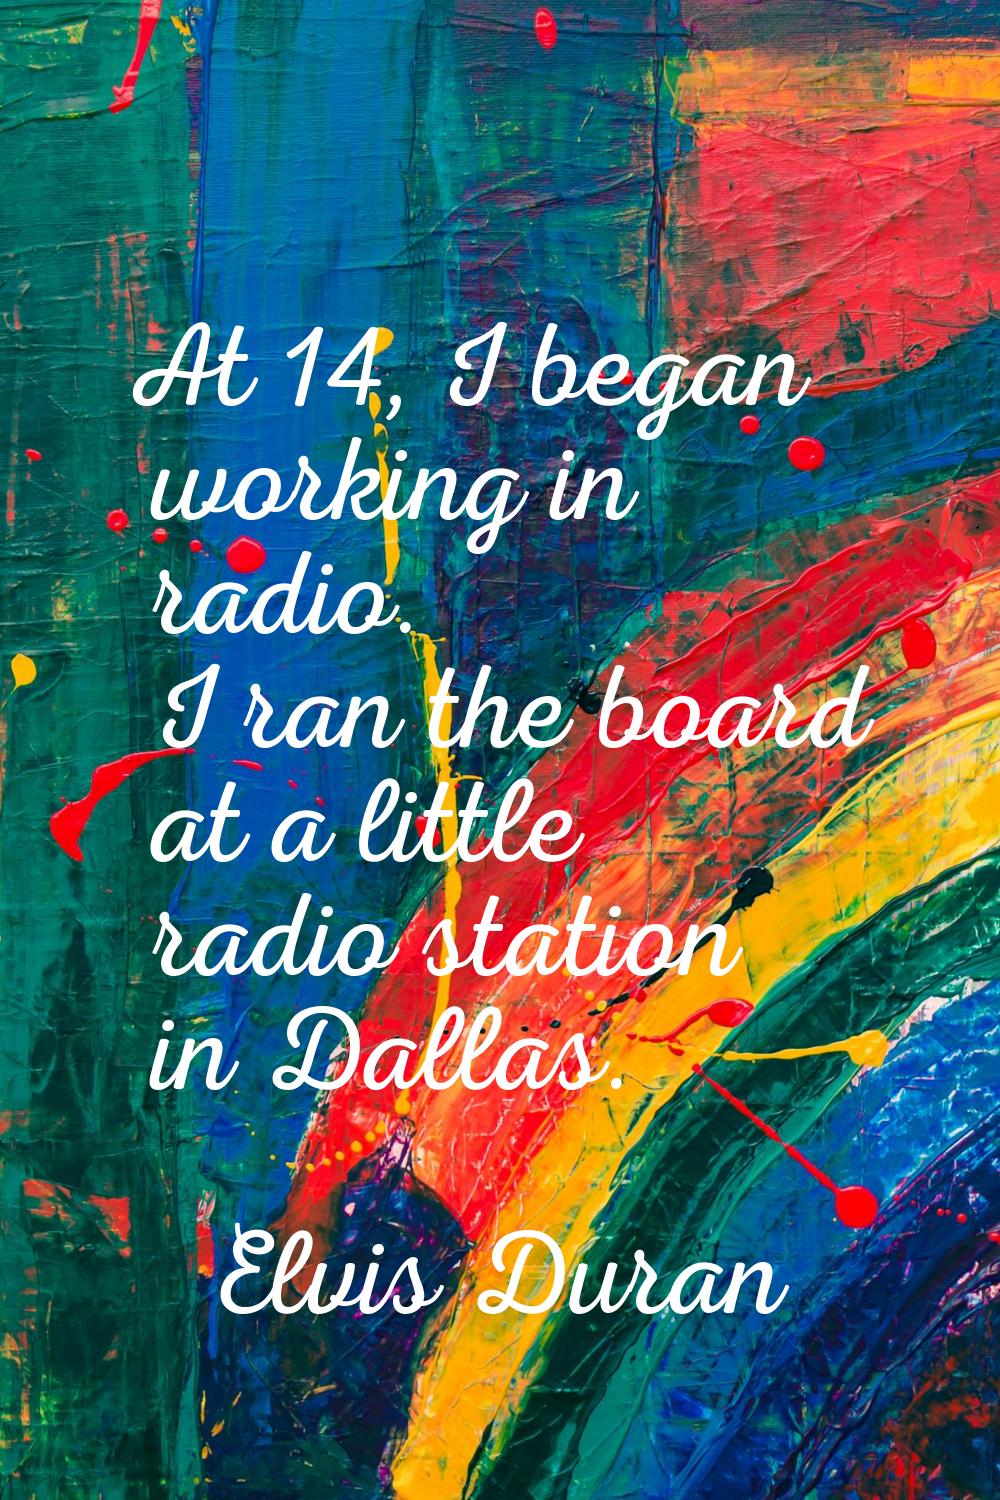 At 14, I began working in radio. I ran the board at a little radio station in Dallas.